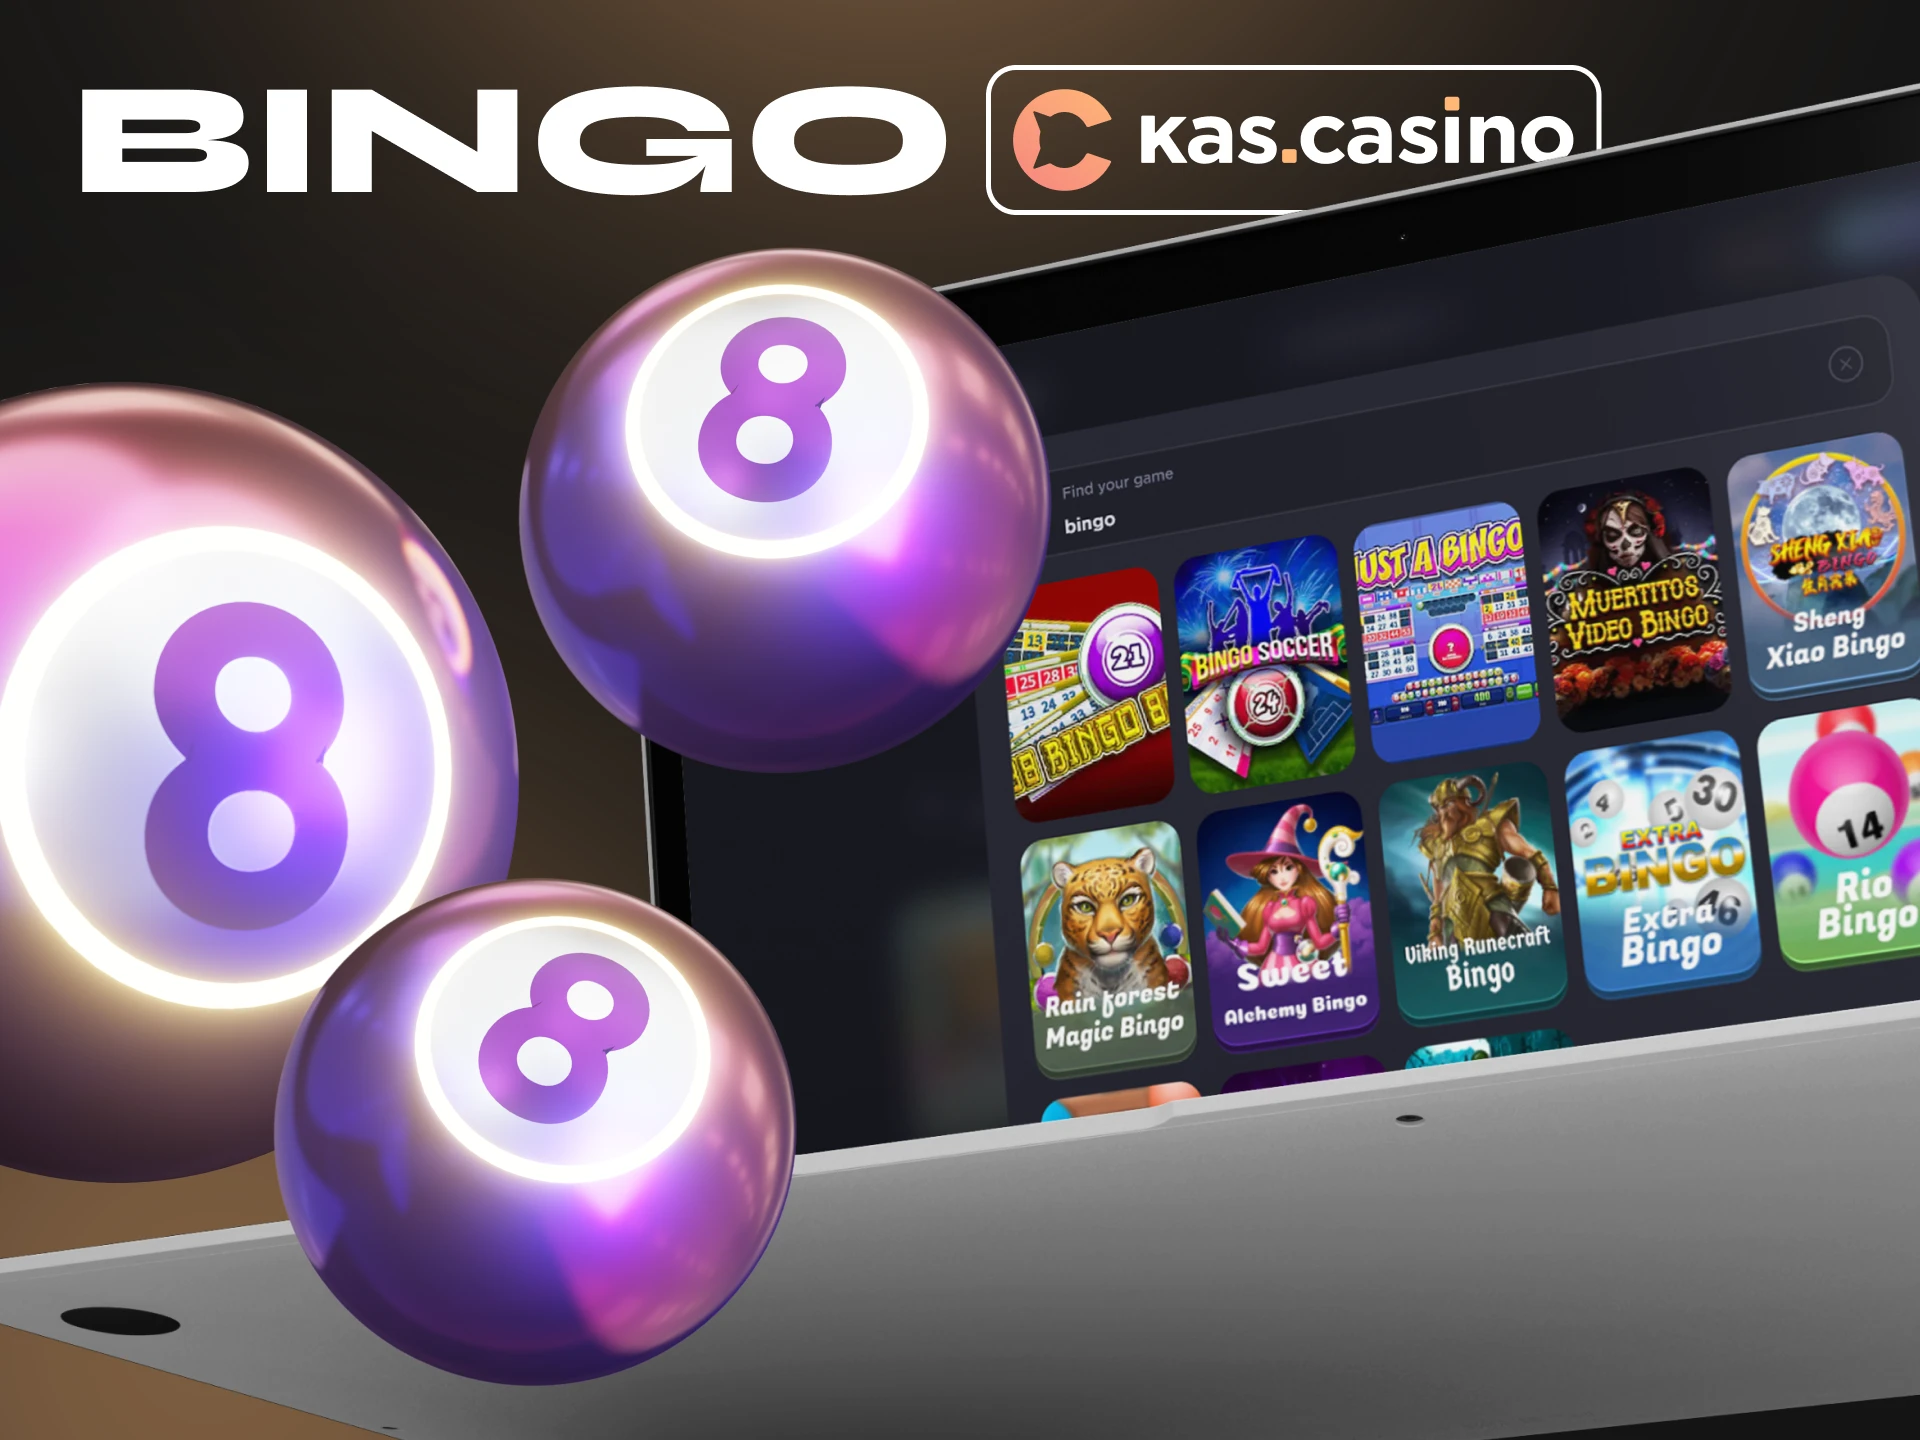 Bingo is a type of lottery casino game, try playing at Kas Casino.